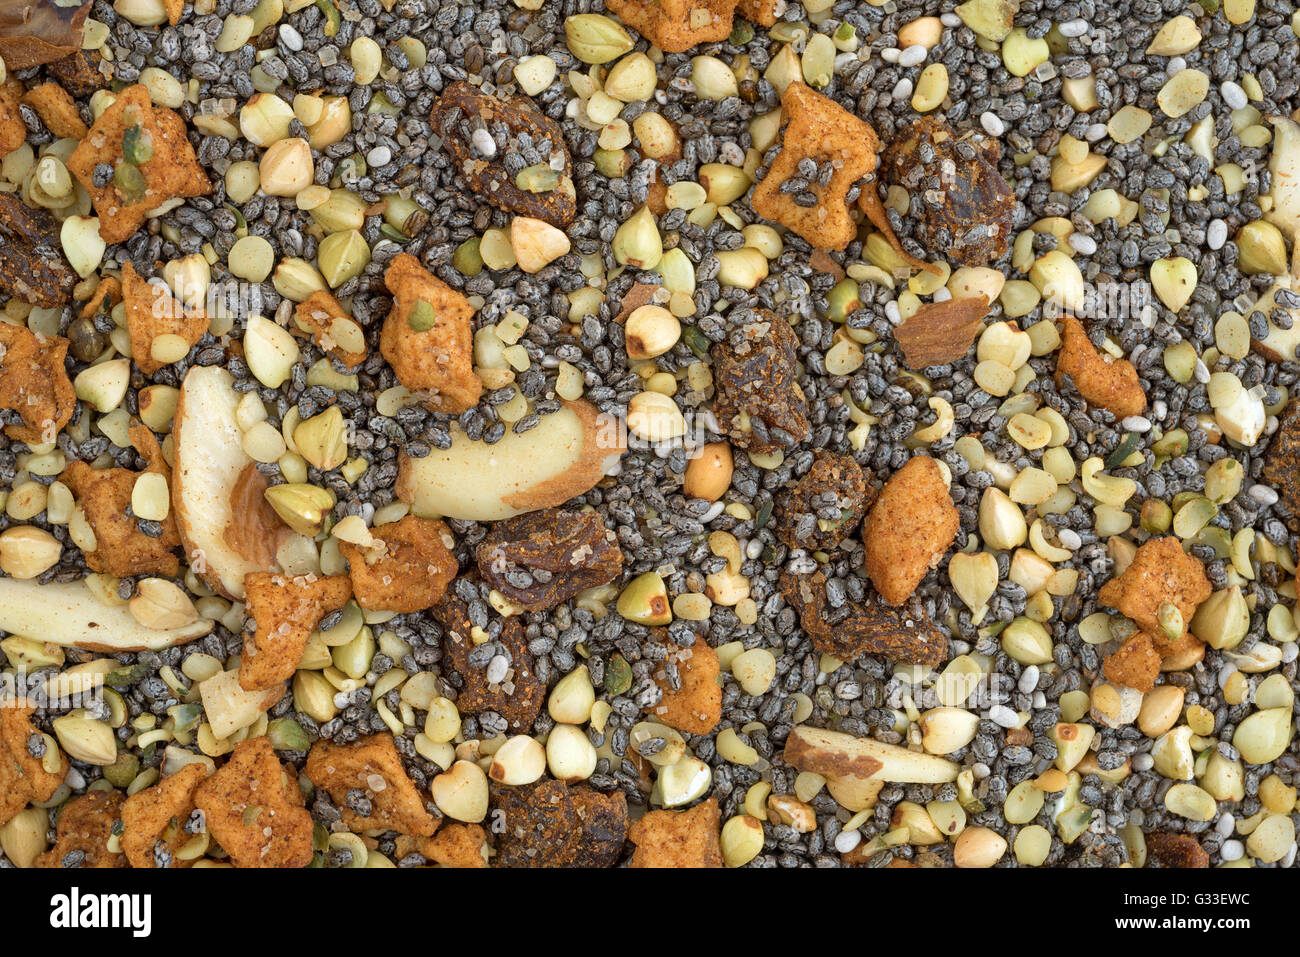 Very close view of dry breakfast cereal consisting of chia seeds, nuts, and dried fruit. Stock Photo